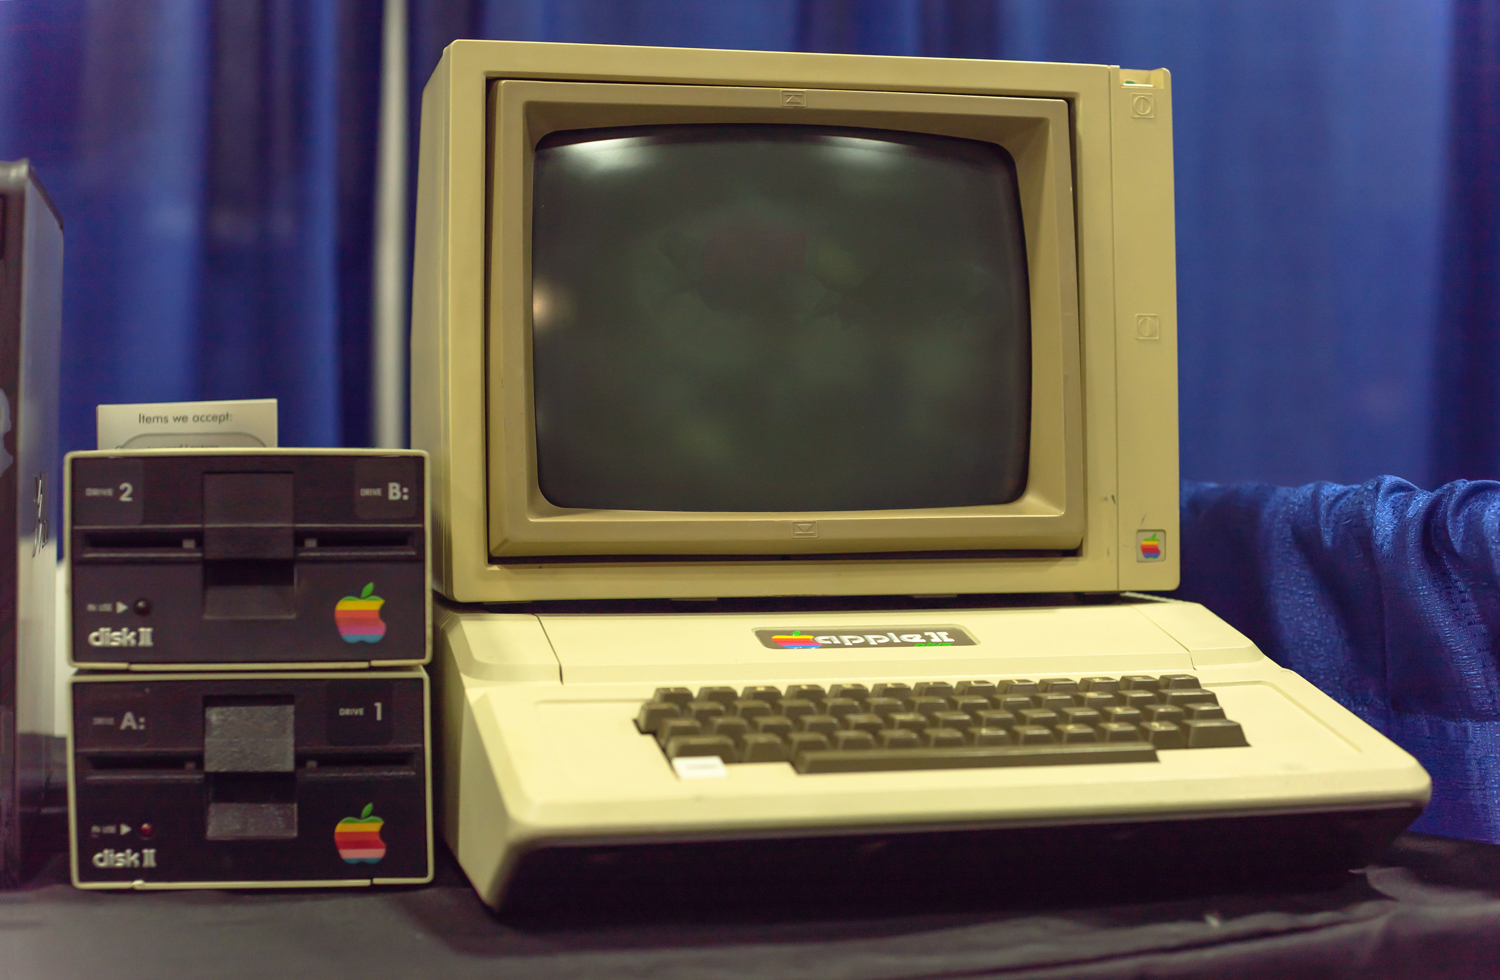 An Apple II computer sits on a desk next to two floppy disk drives.